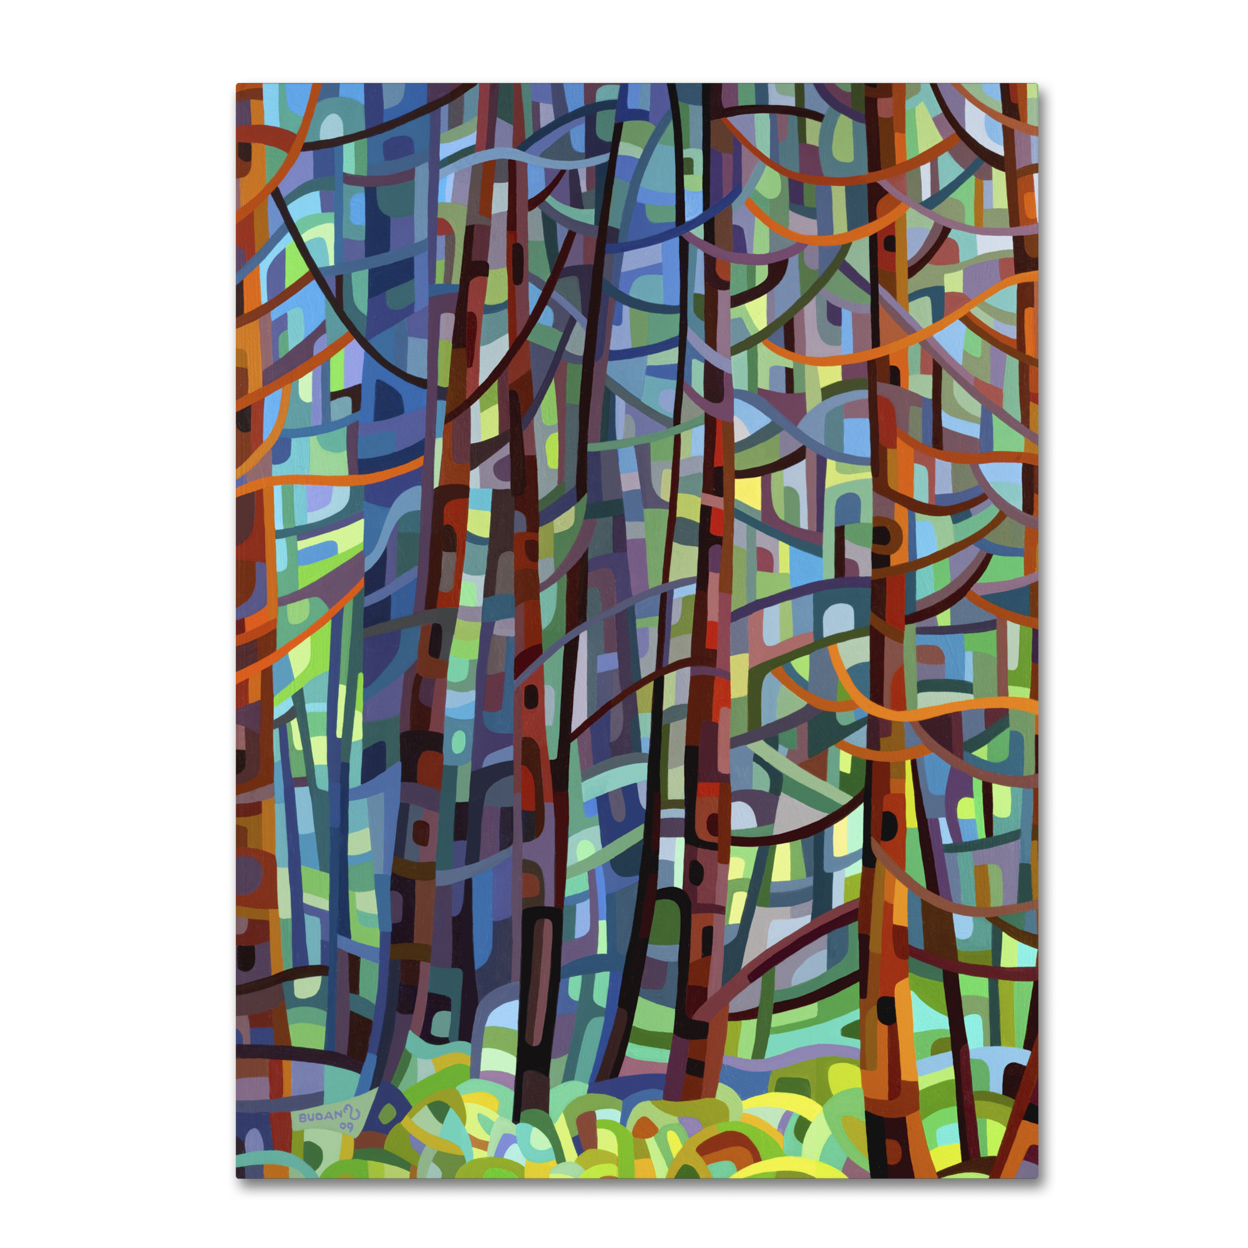 Mandy Budan 'In A Pine Forest' Canvas Wall Art 35 X 47 Inches